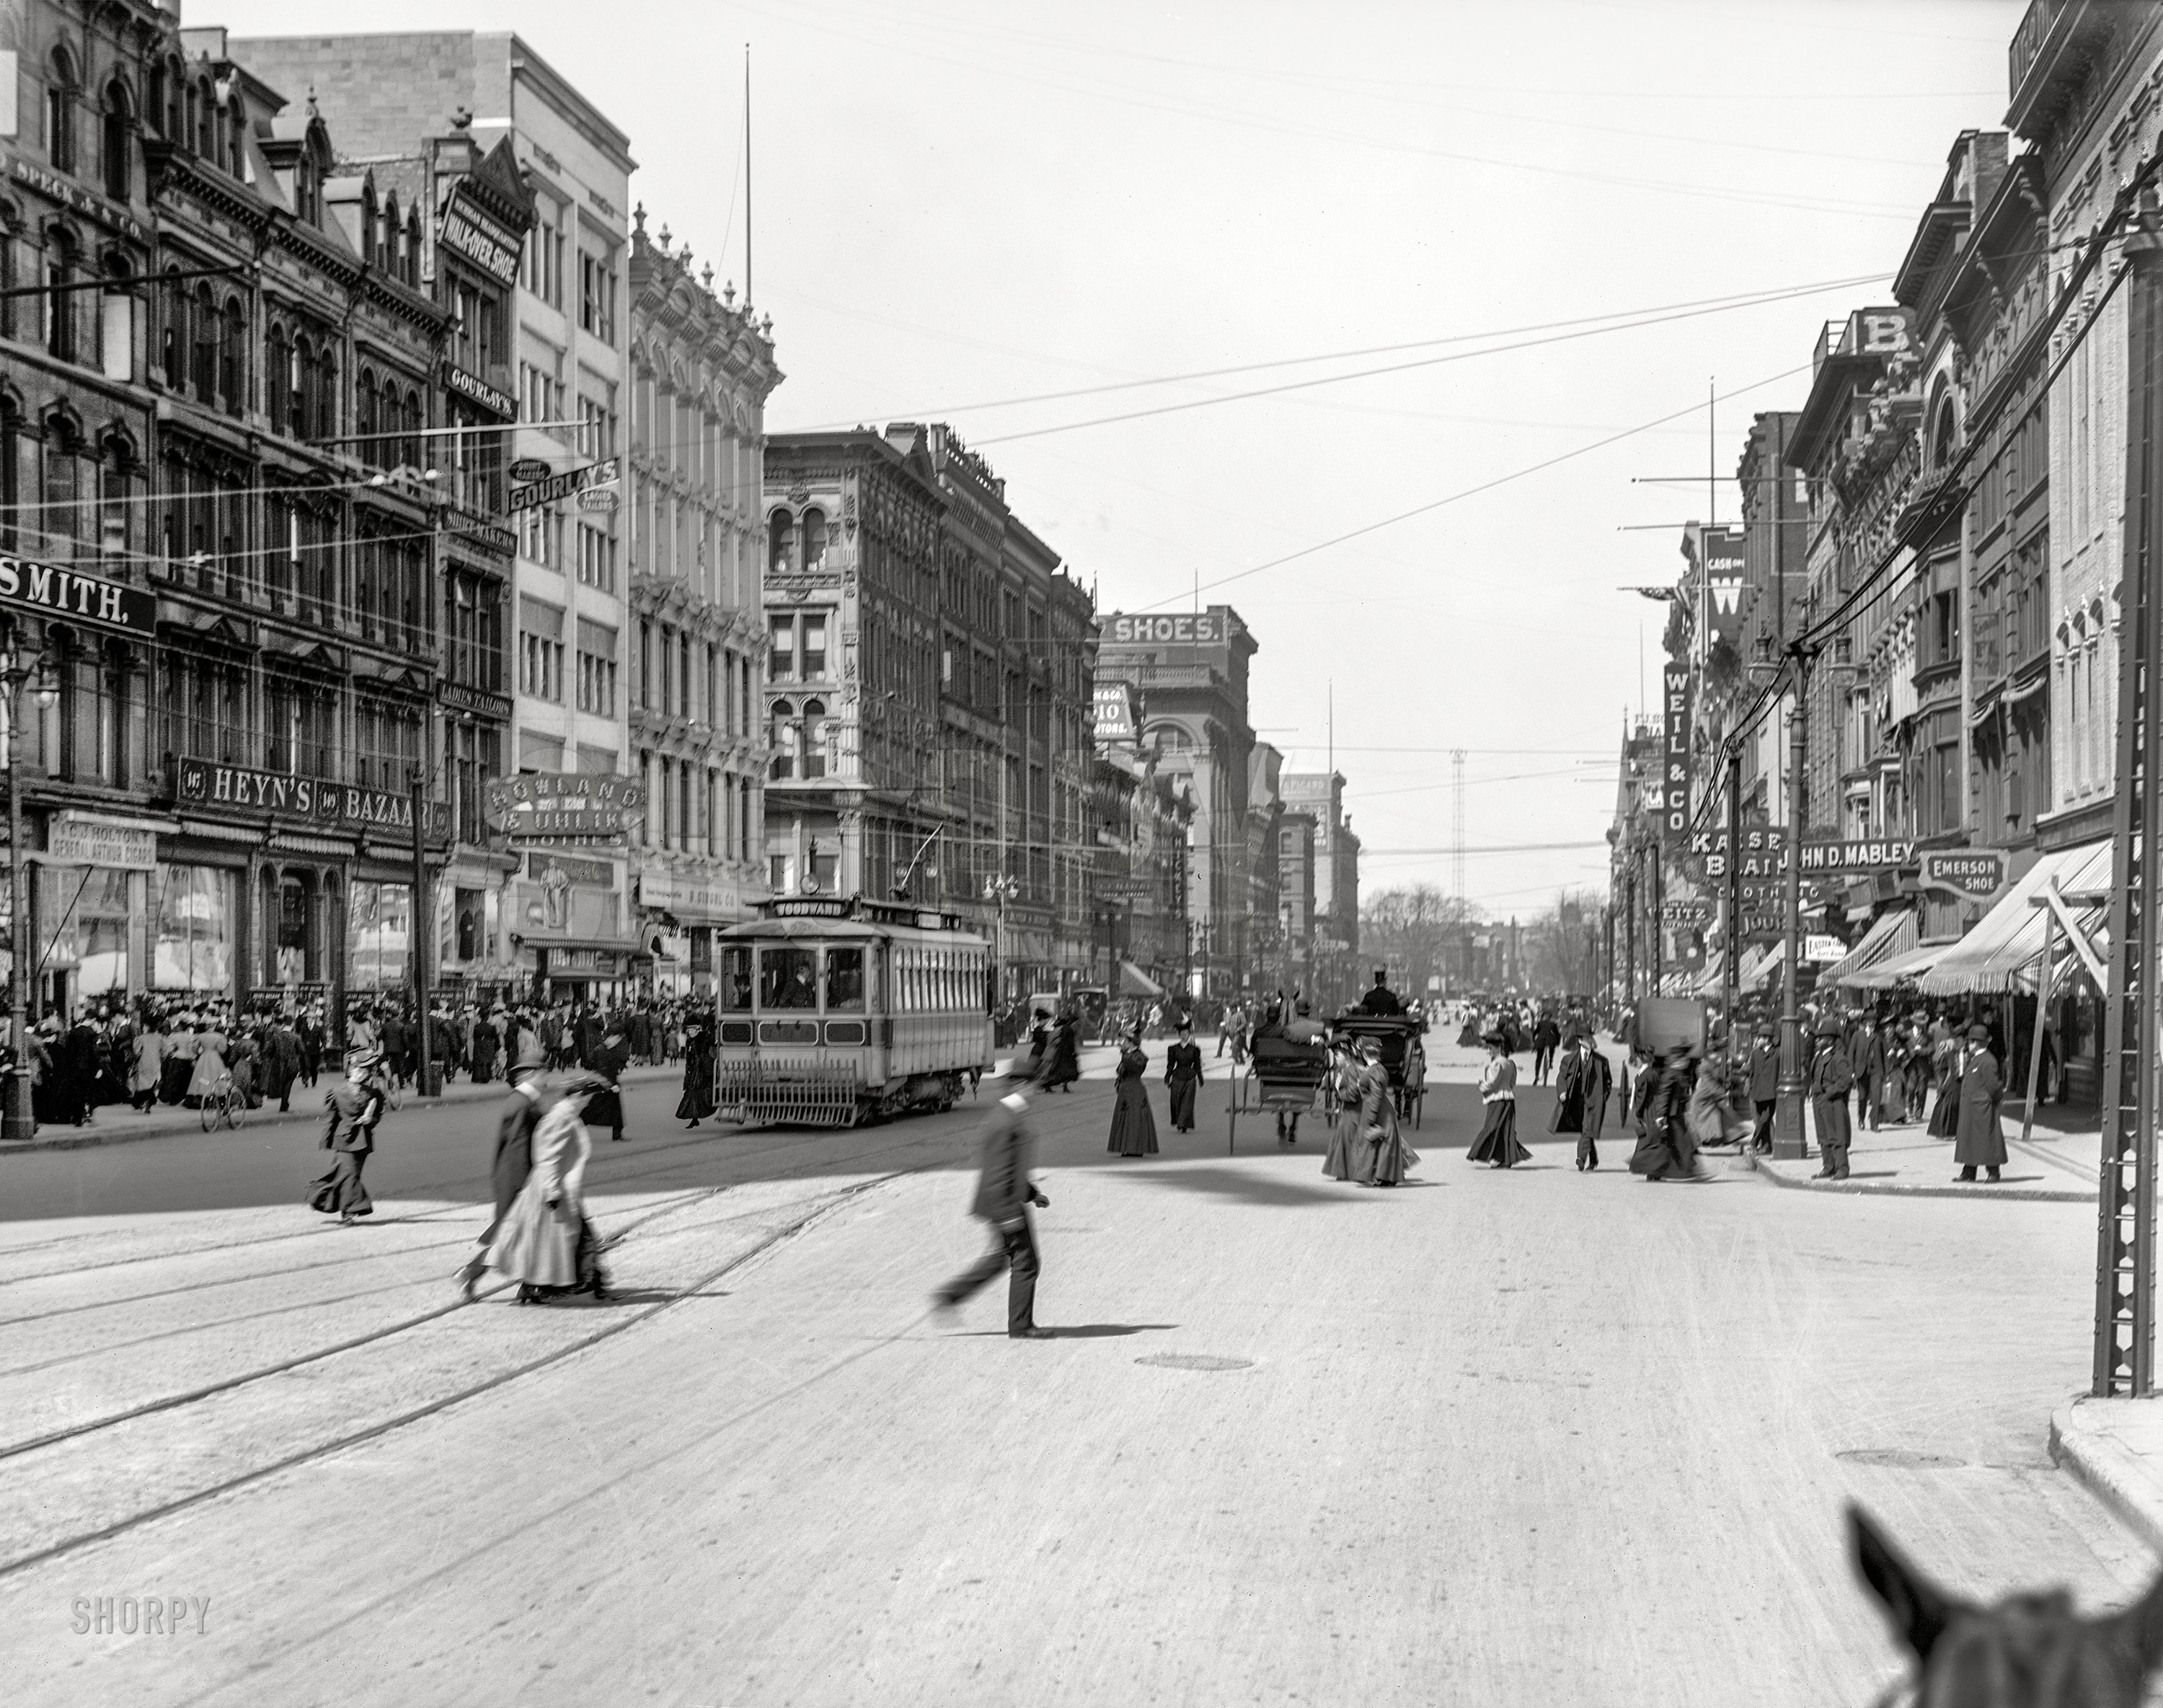 Detroit circa 1907. "Looking up Woodward Avenue from the Campus Martius." 8x10 inch dry plate glass negative, Detroit Publishing Company. View full size.